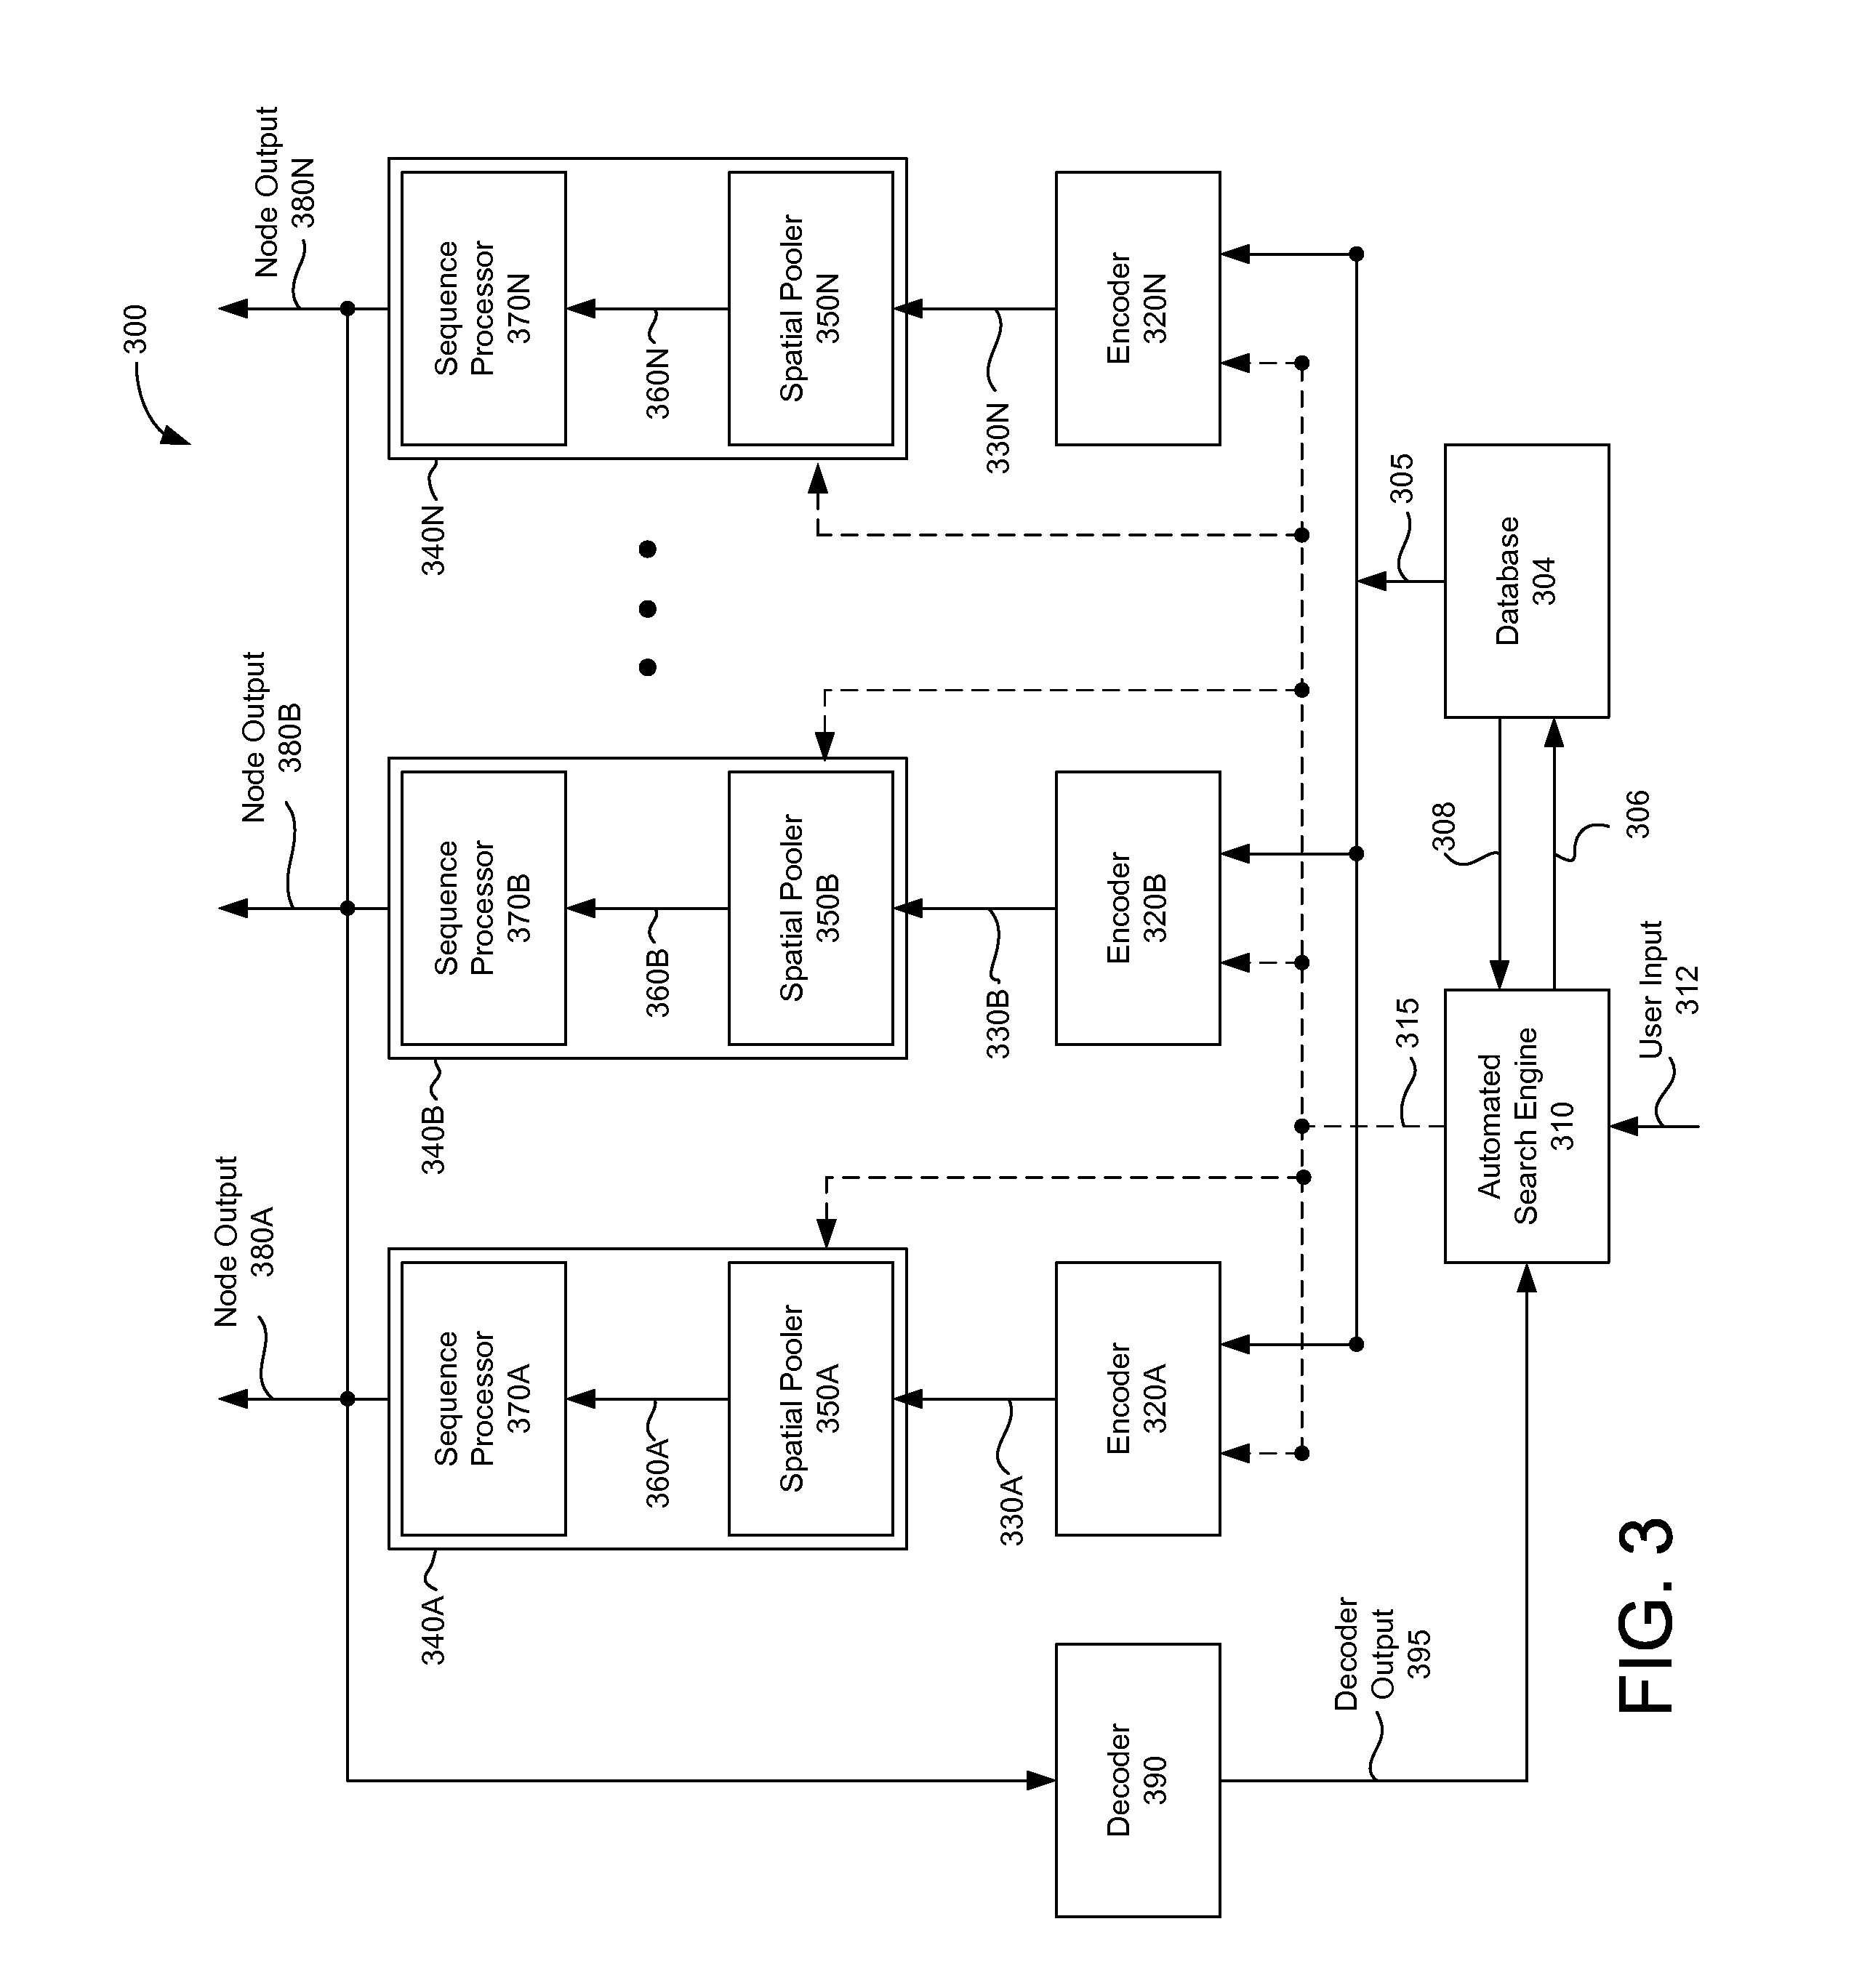 Encoding of data for processing in a spatial and temporal memory system